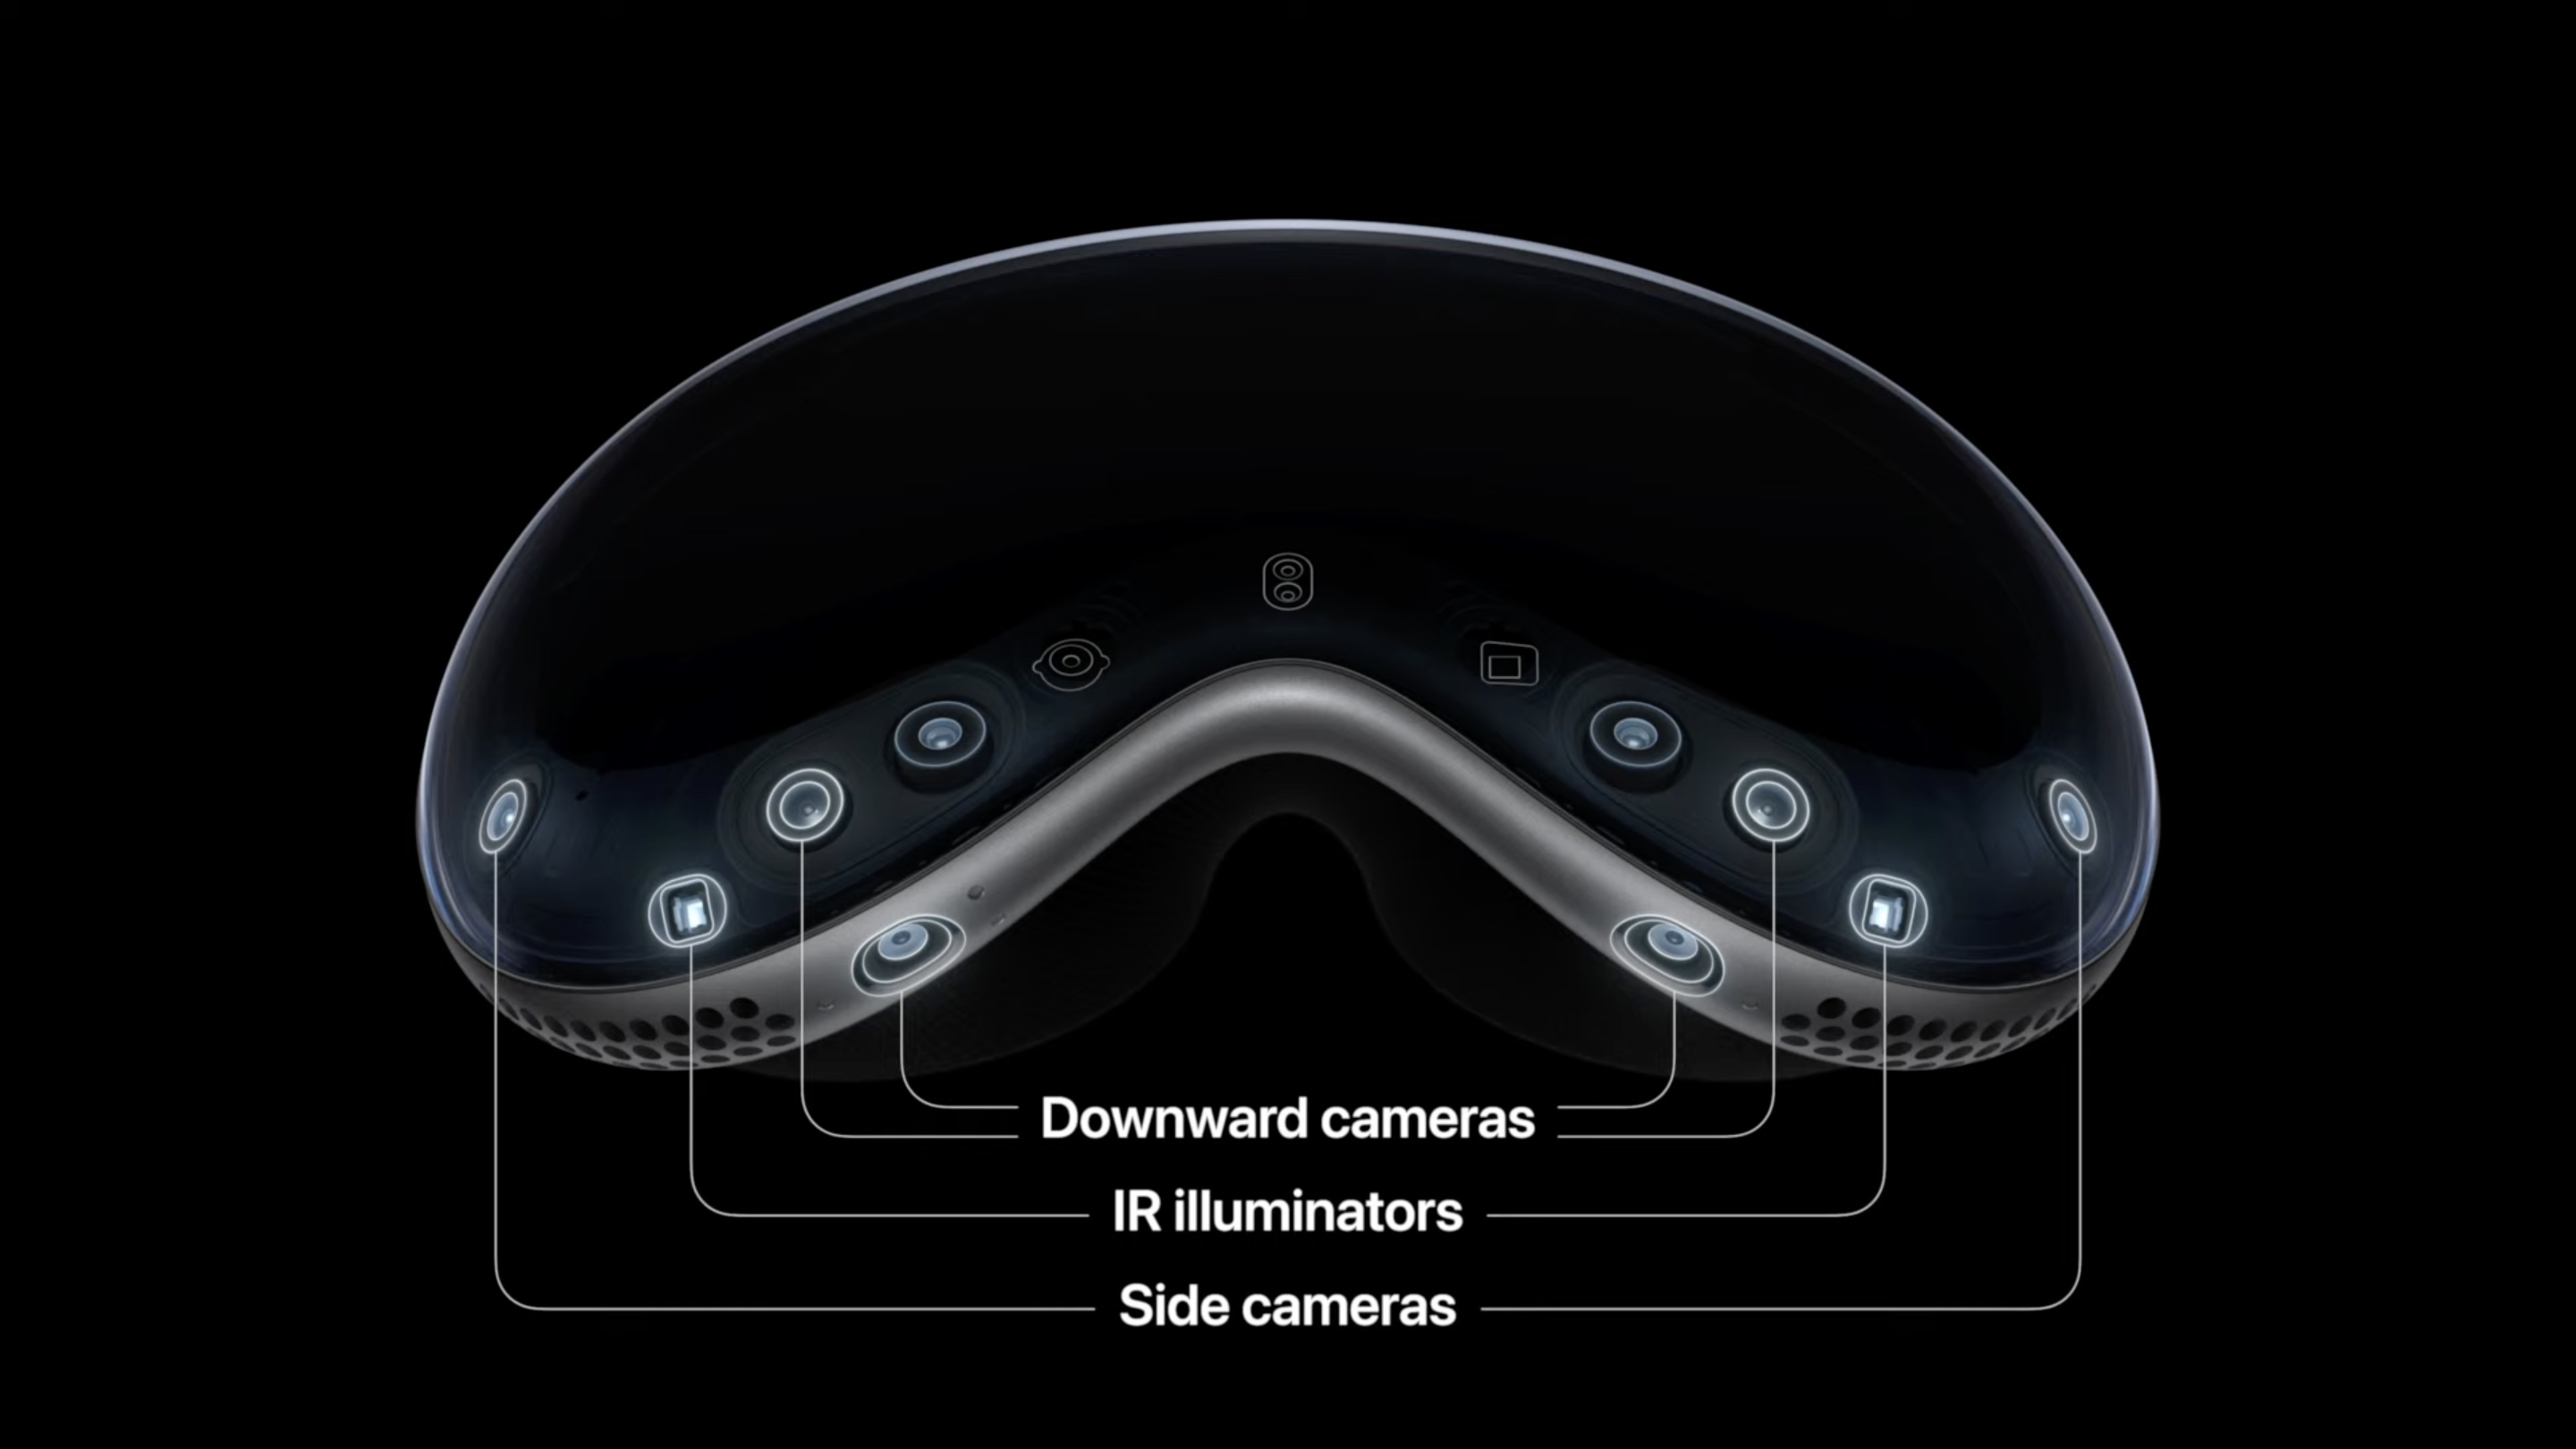 The Apple Vision Pro headset on a black background